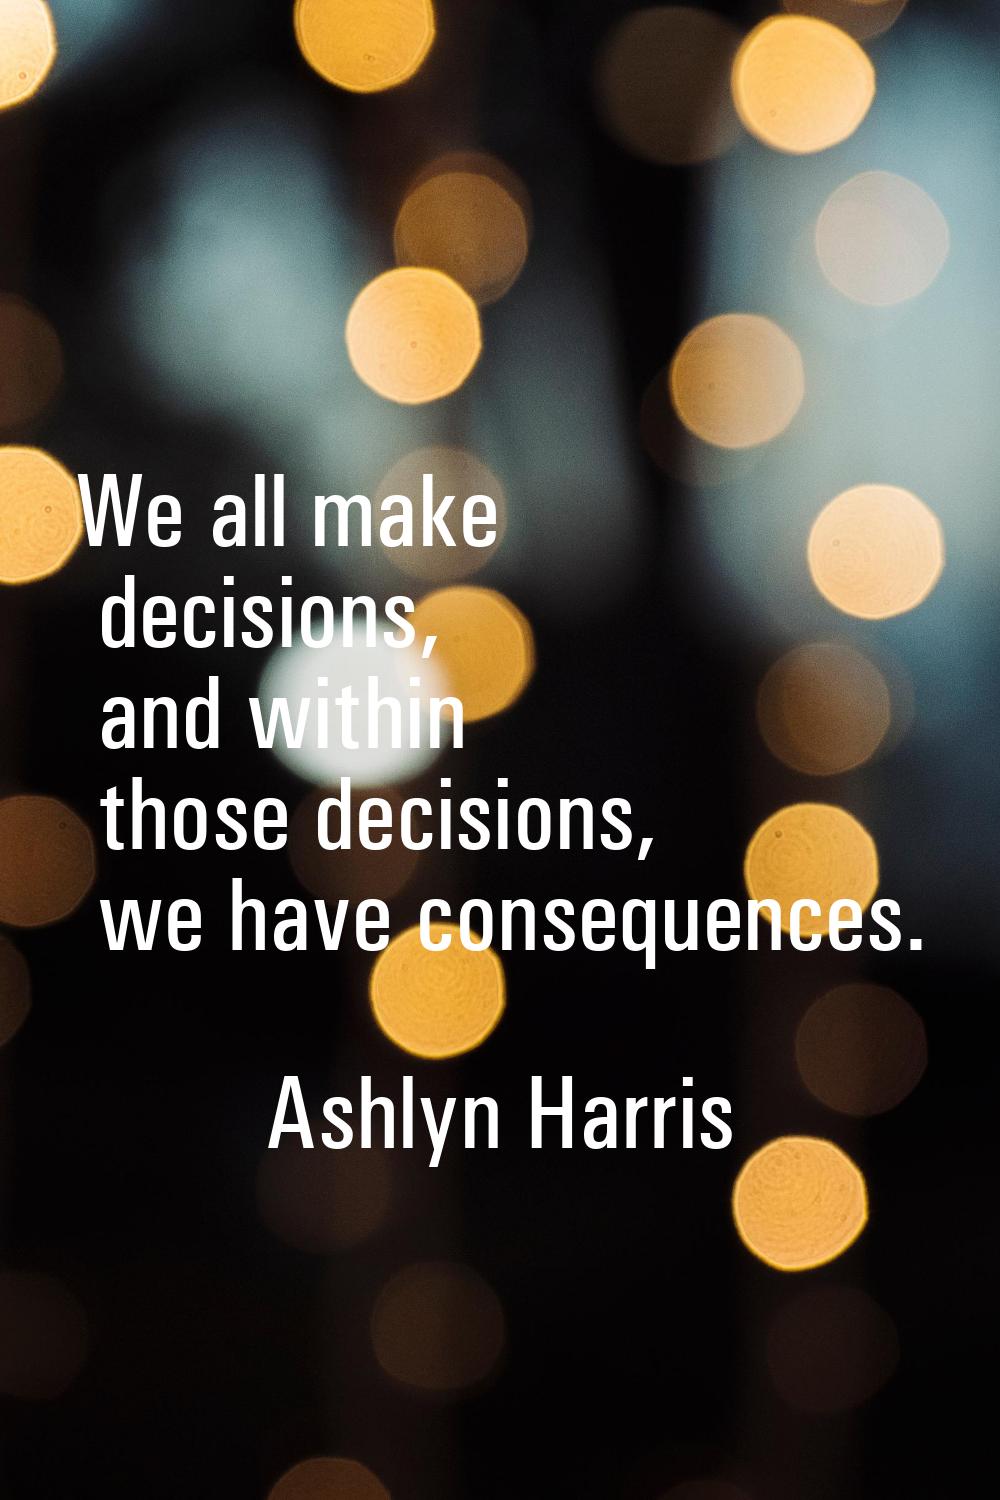 We all make decisions, and within those decisions, we have consequences.